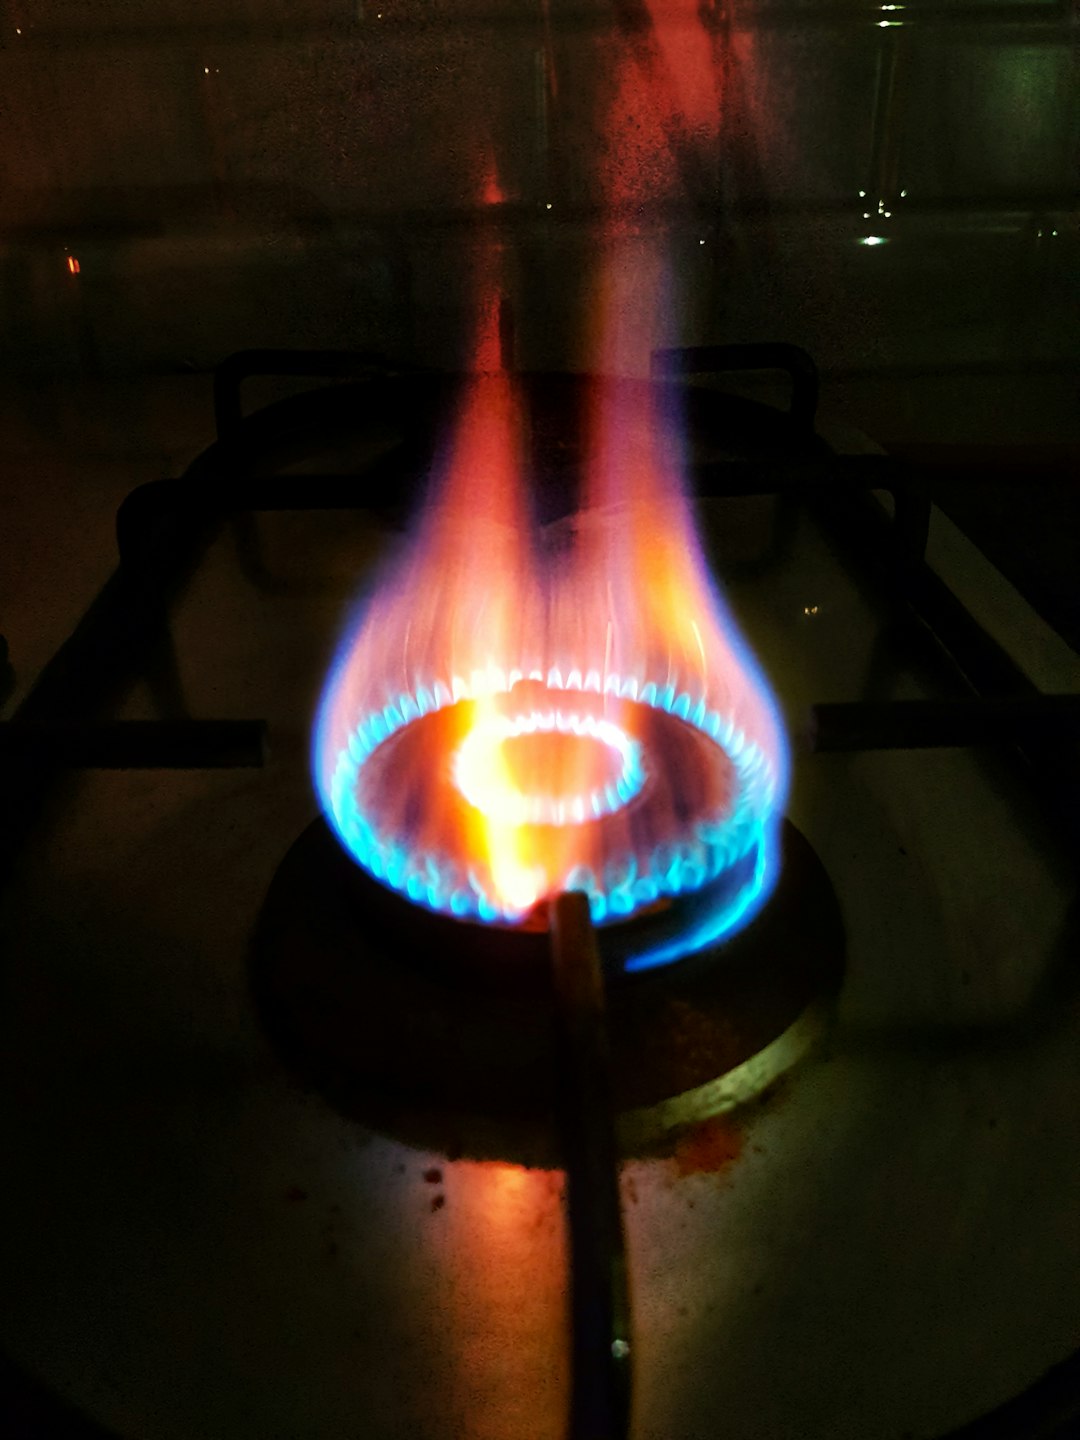  blue and red flame on black metal frame stove